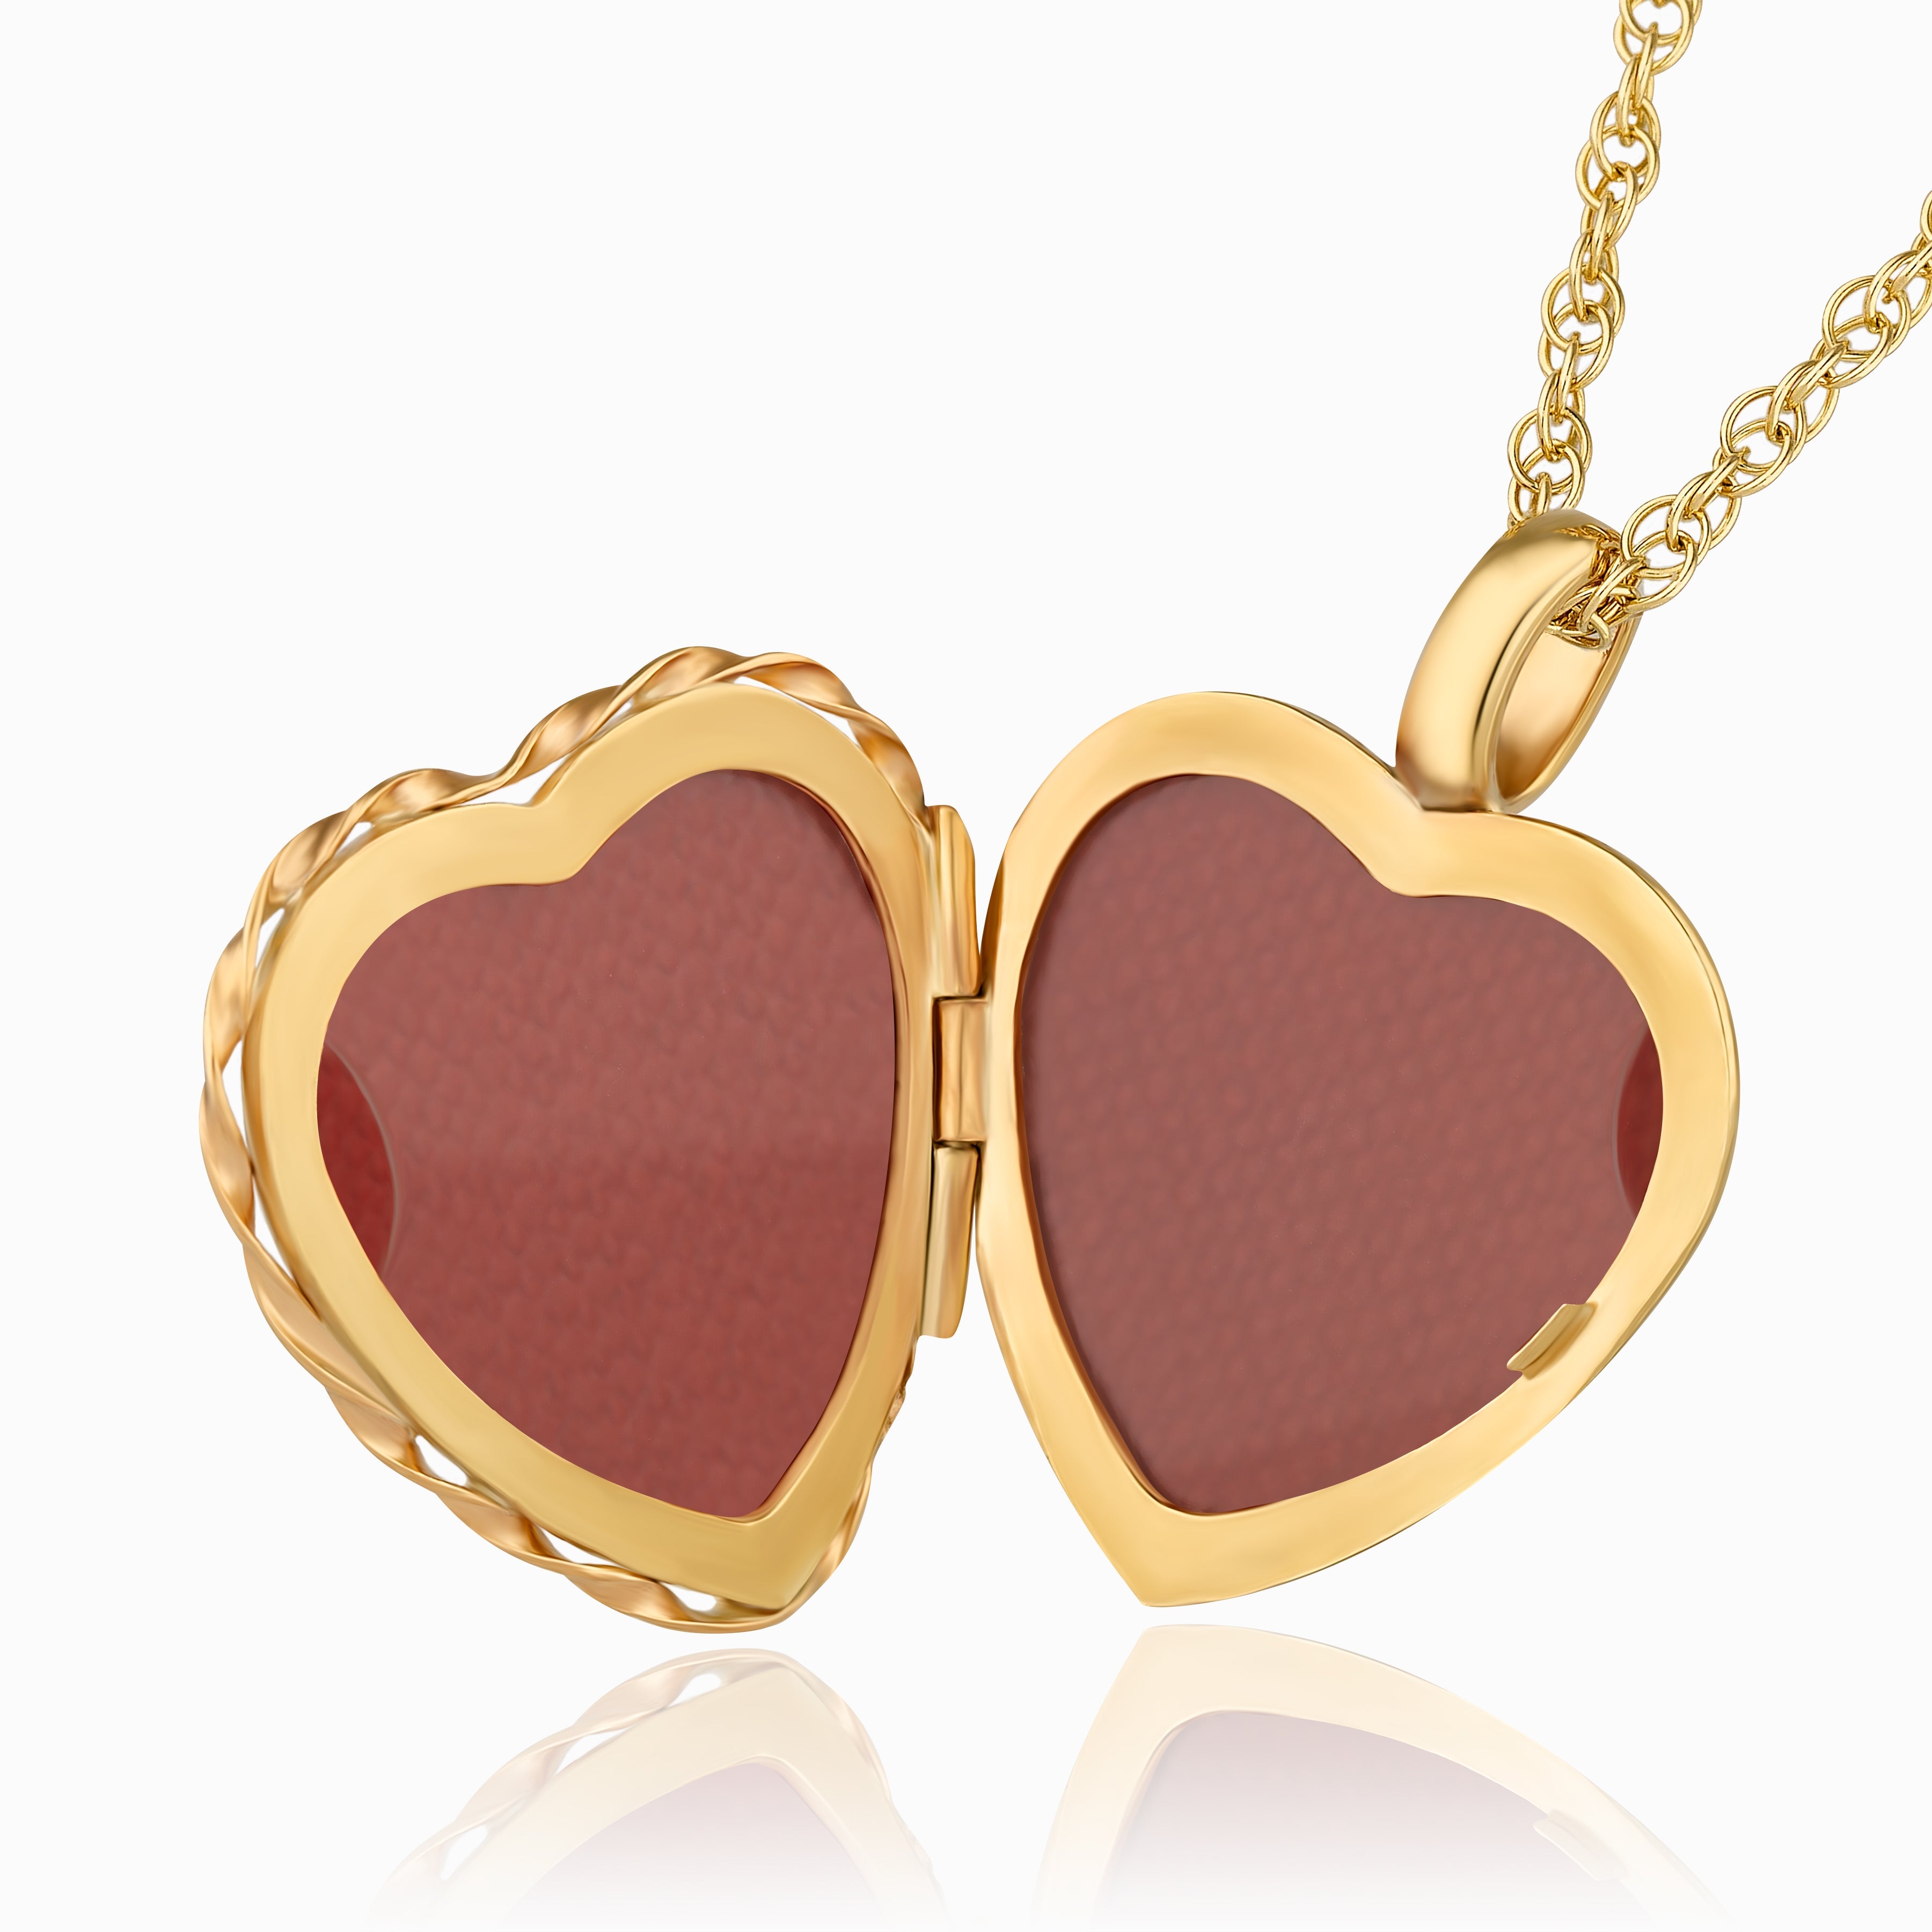 Product title: Victorian Gold Heart Locket, product type: Locket